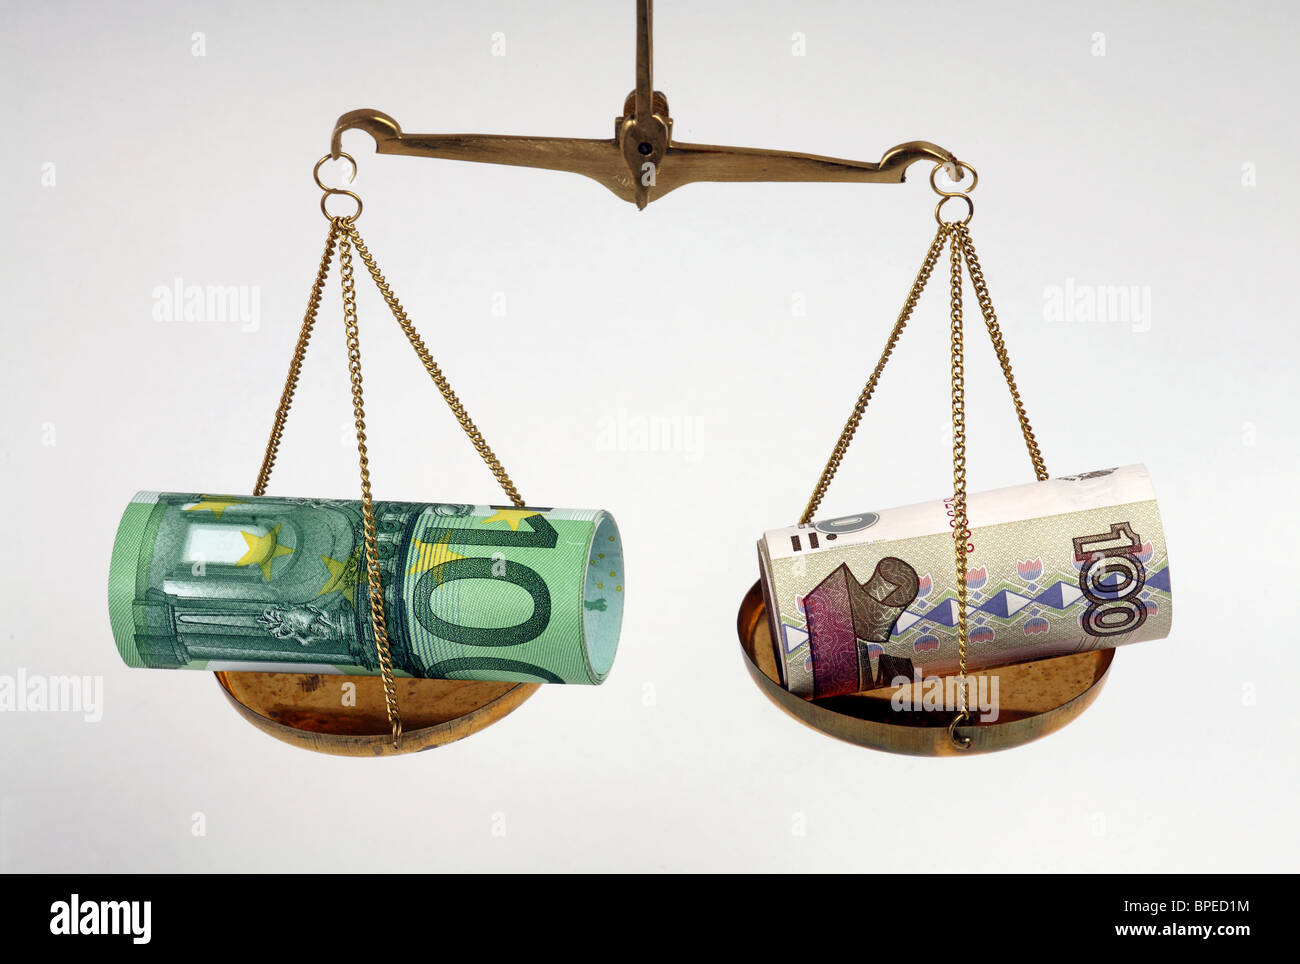 Euro and ruble banknotes on balanced scales Stock Photo